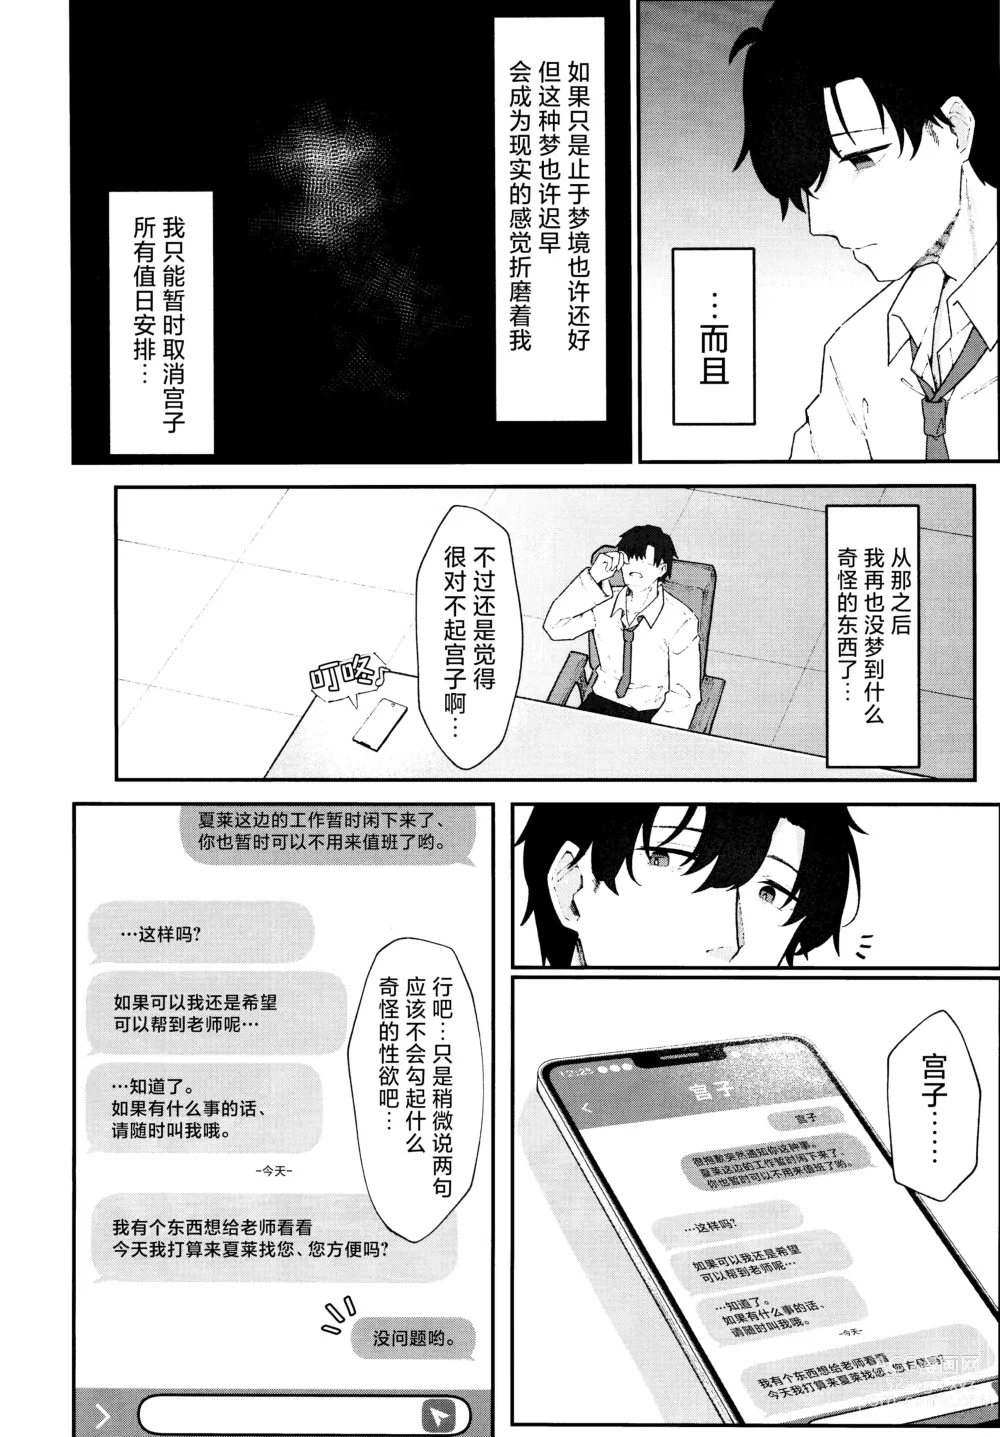 Page 12 of doujinshi 堕入兔穴